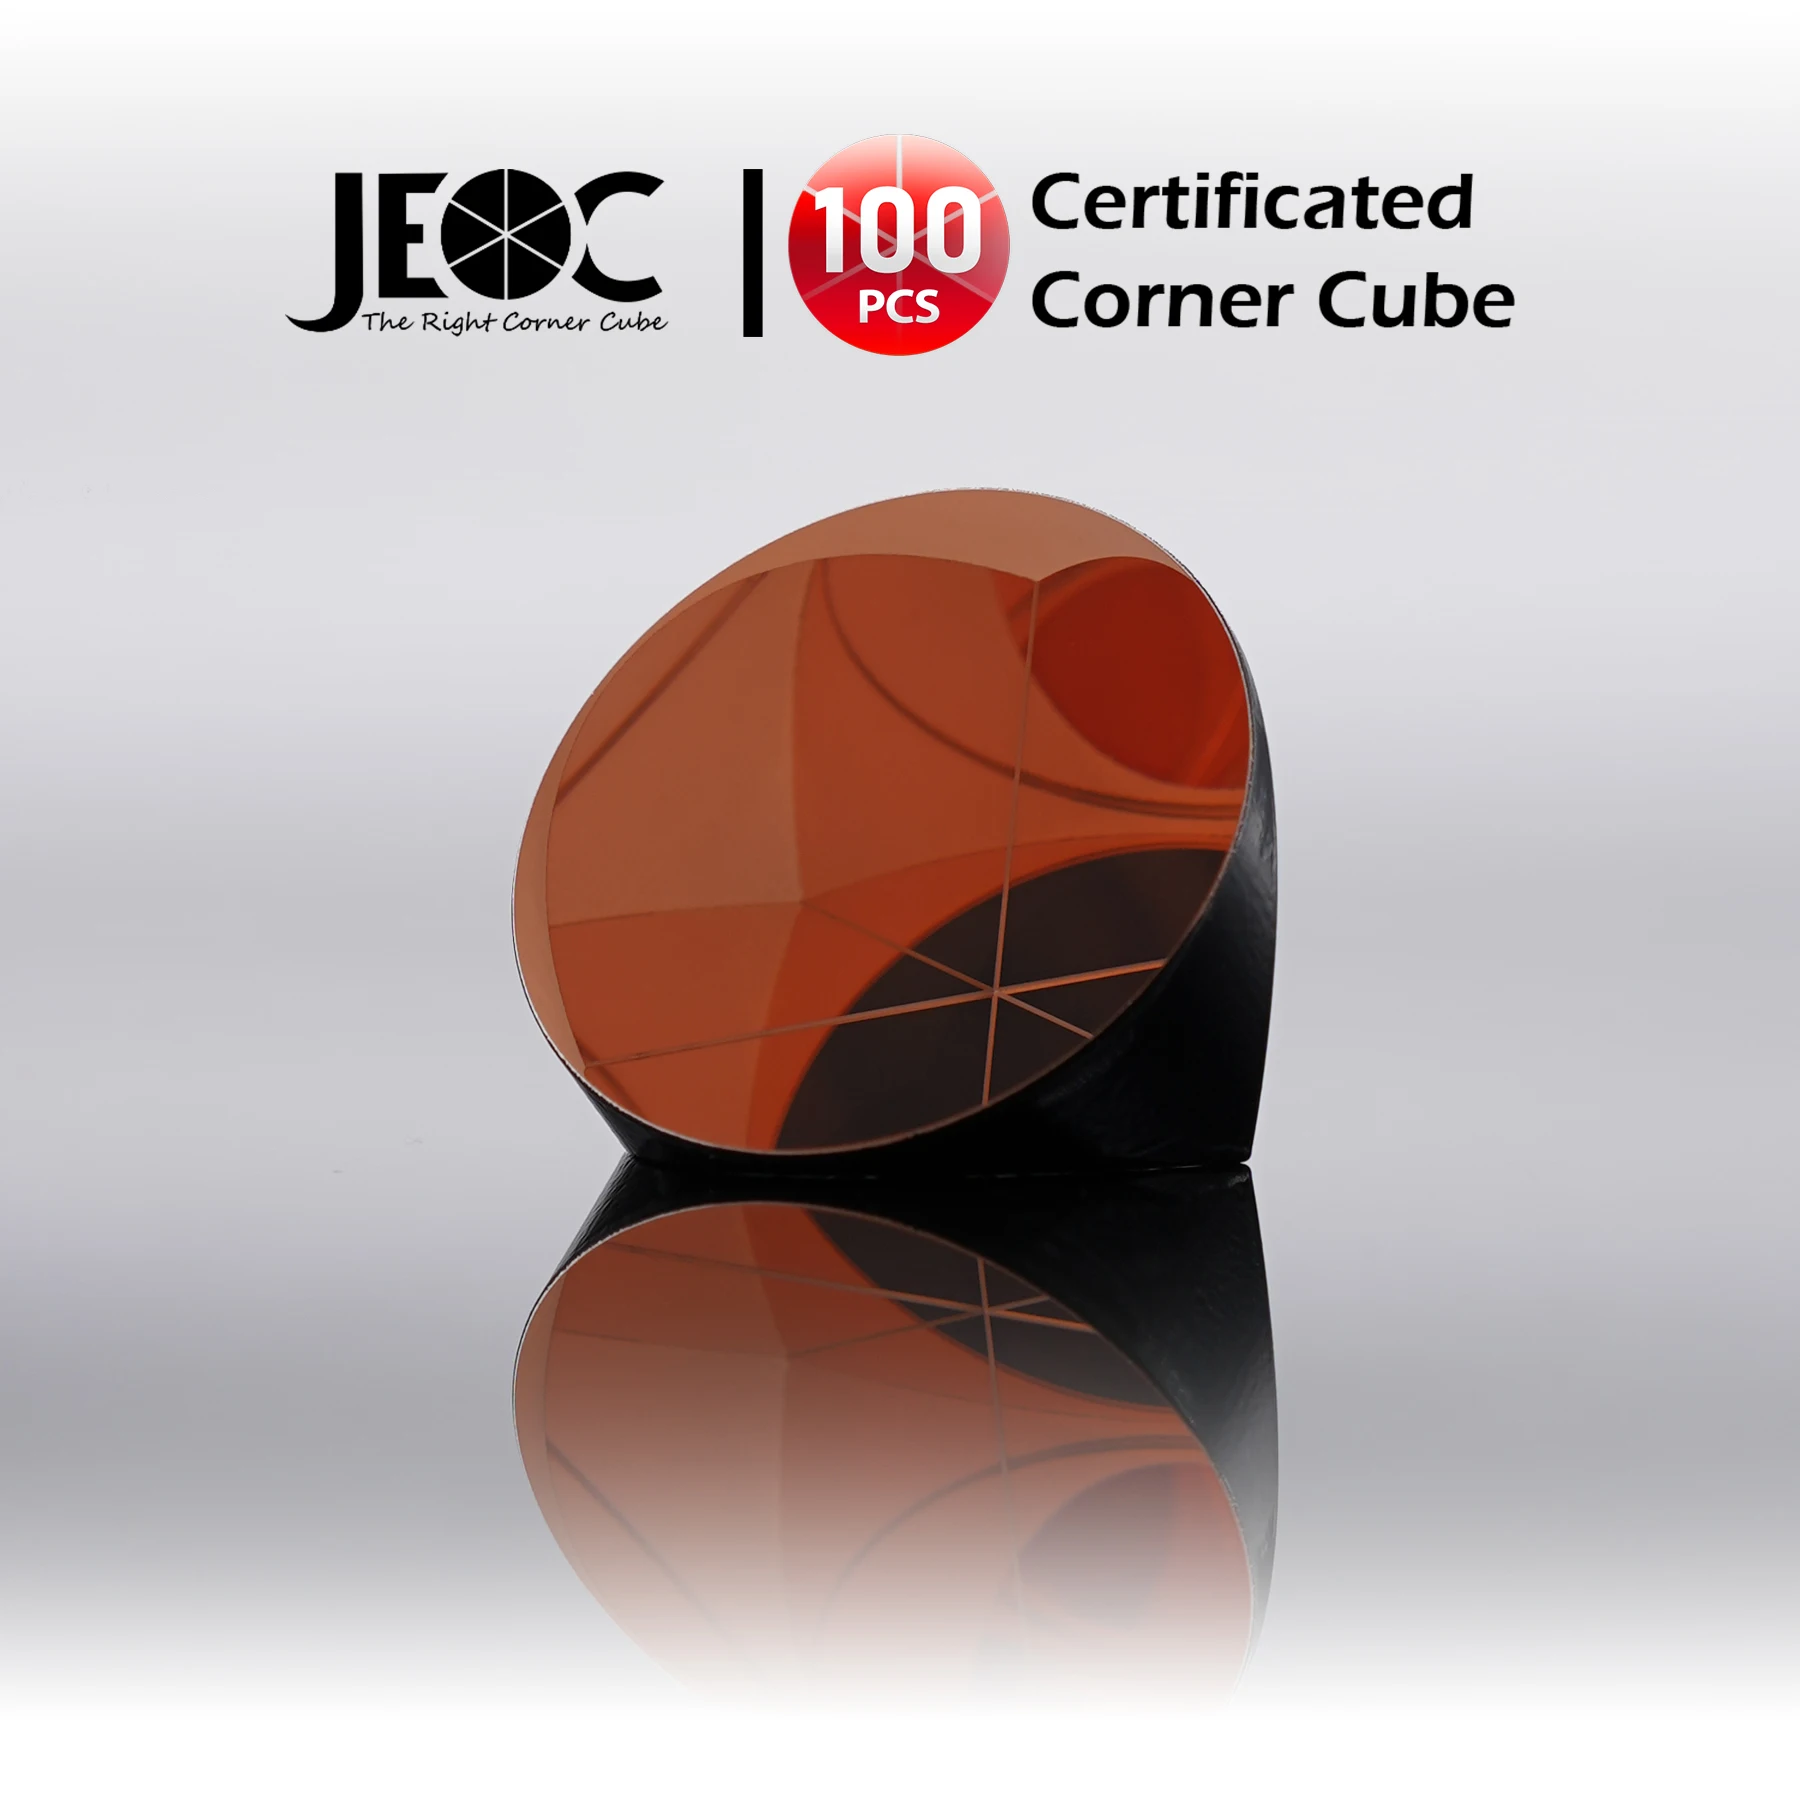 

100pcs JEOC Certificated Corner Cube, 38.1mm (1.5") Diameter, 28.5mm (1.12") Height reflective prism, Copper Coated